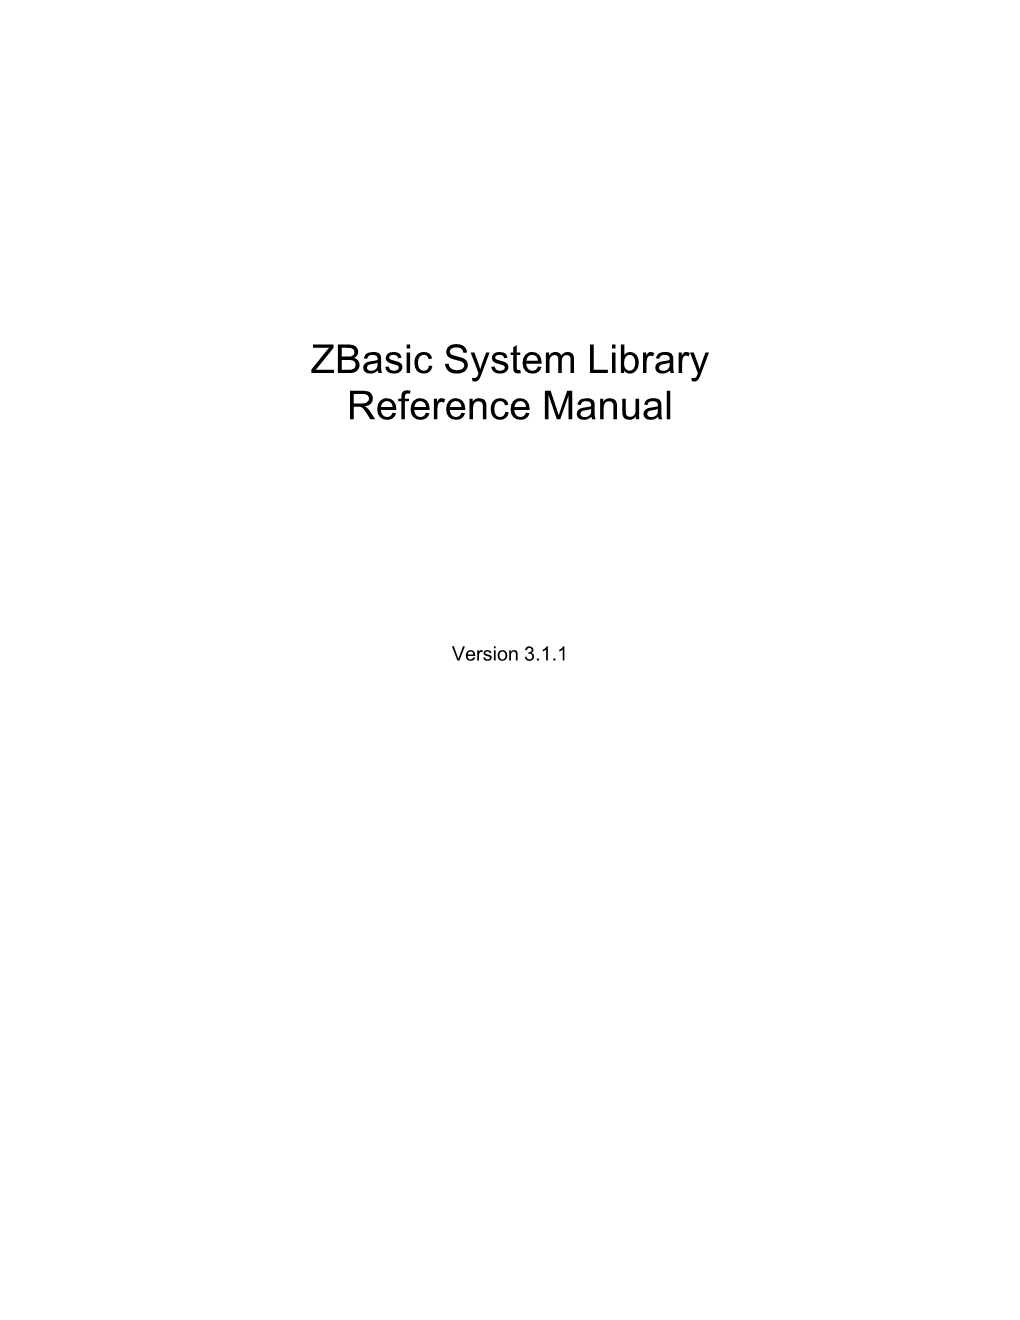 Zbasic System Library Reference Manual